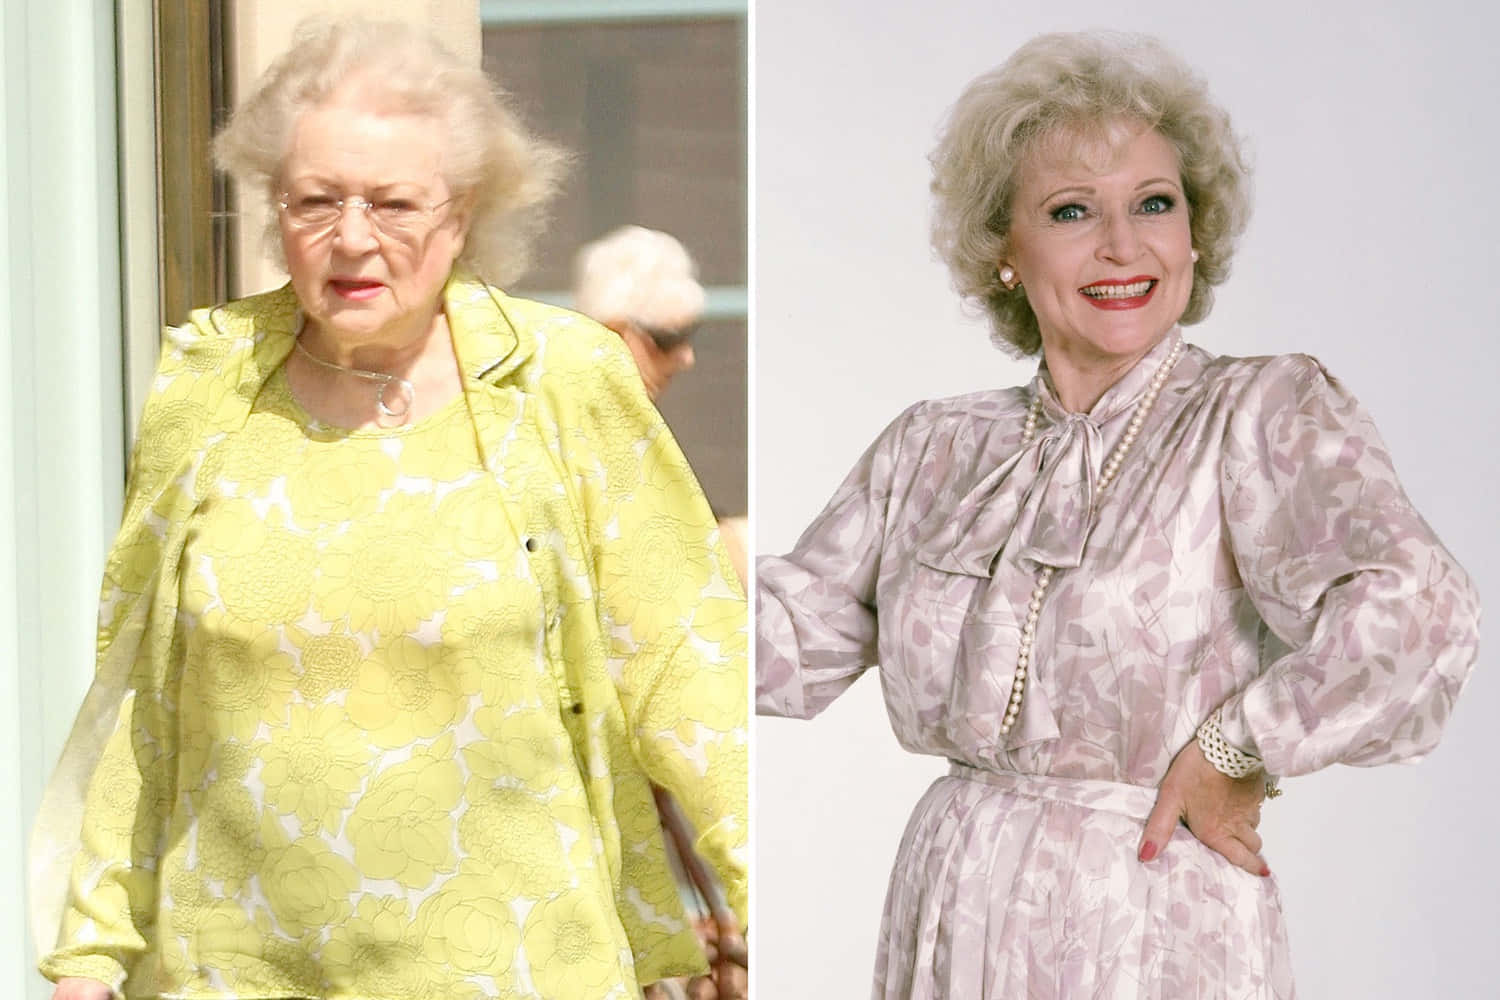 Legendary actress Betty White lights up the screen.